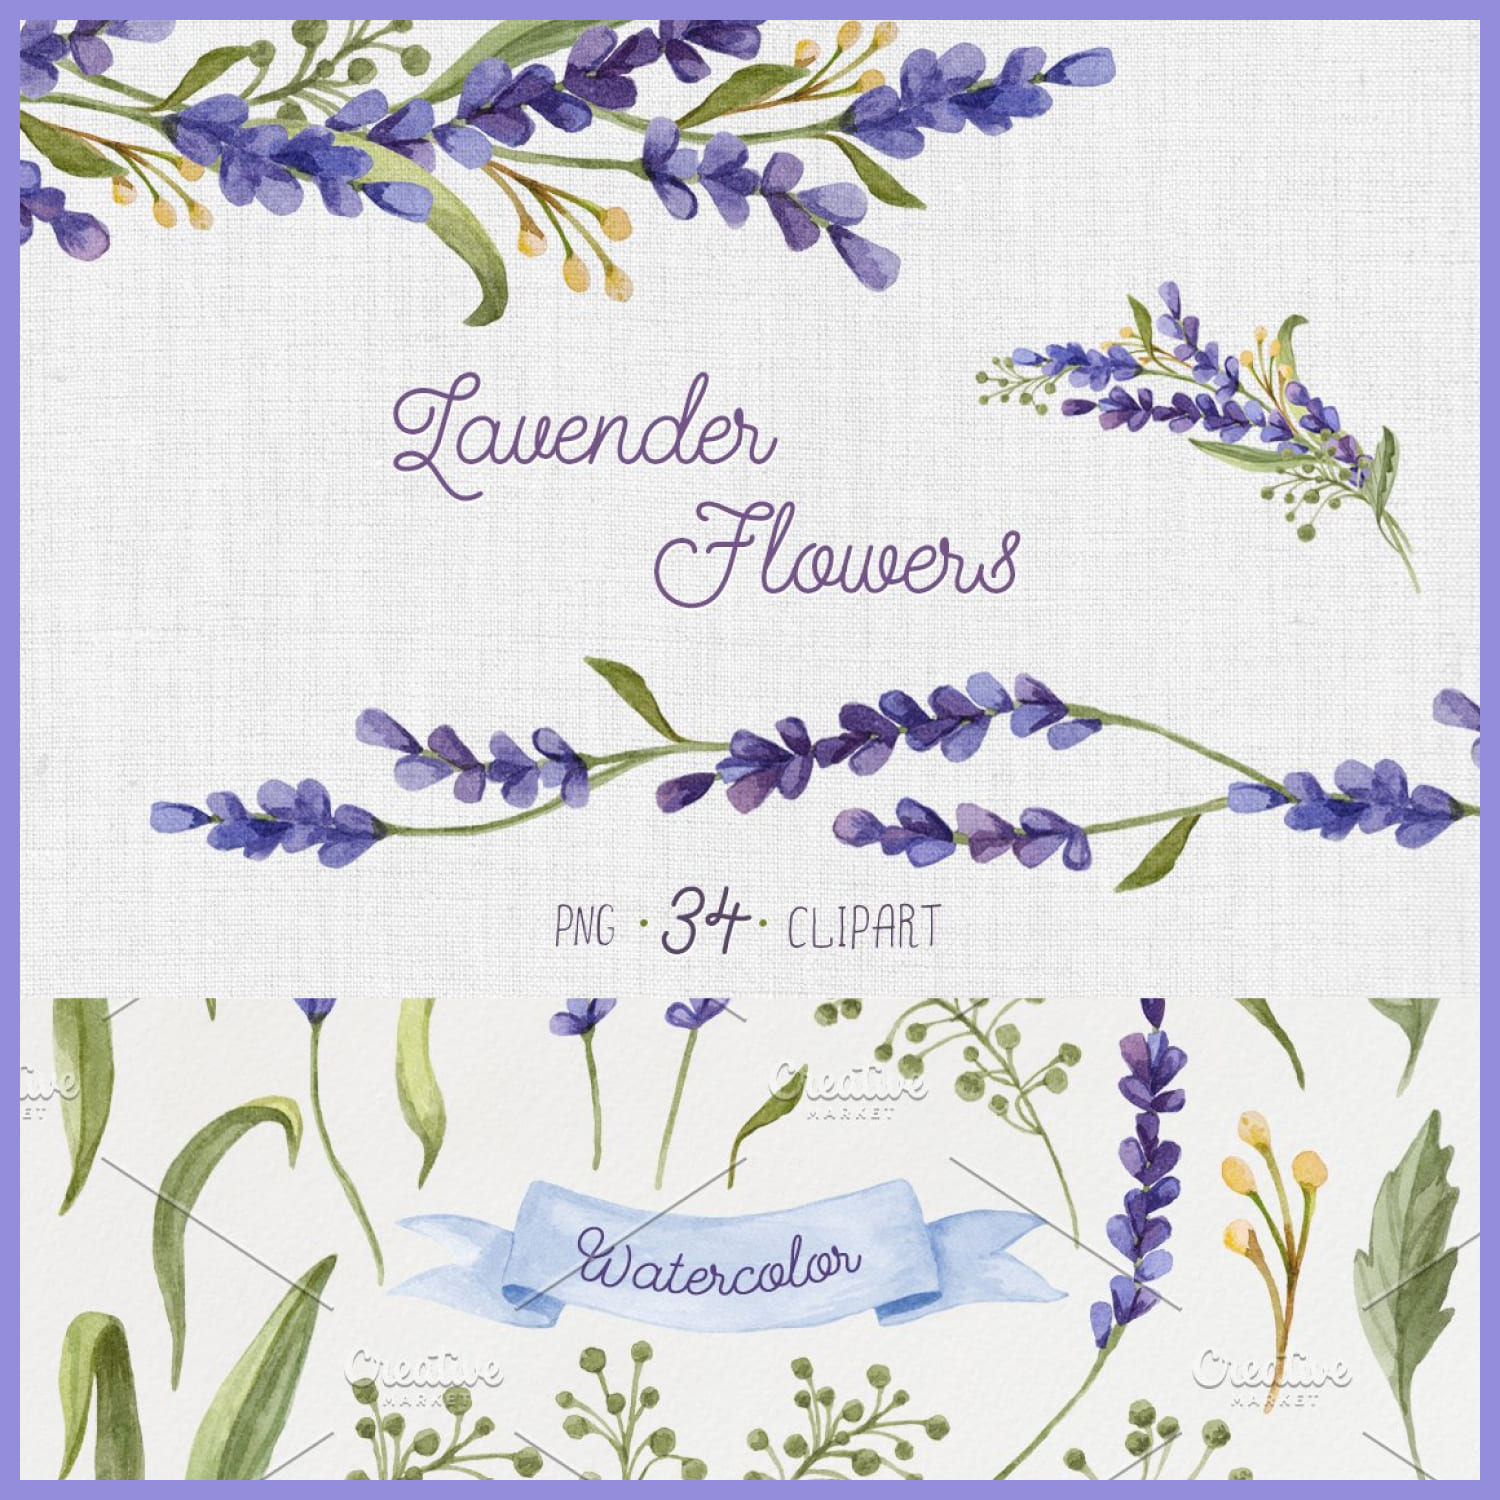 Watercolor Set with Lavender Flowers cover image.